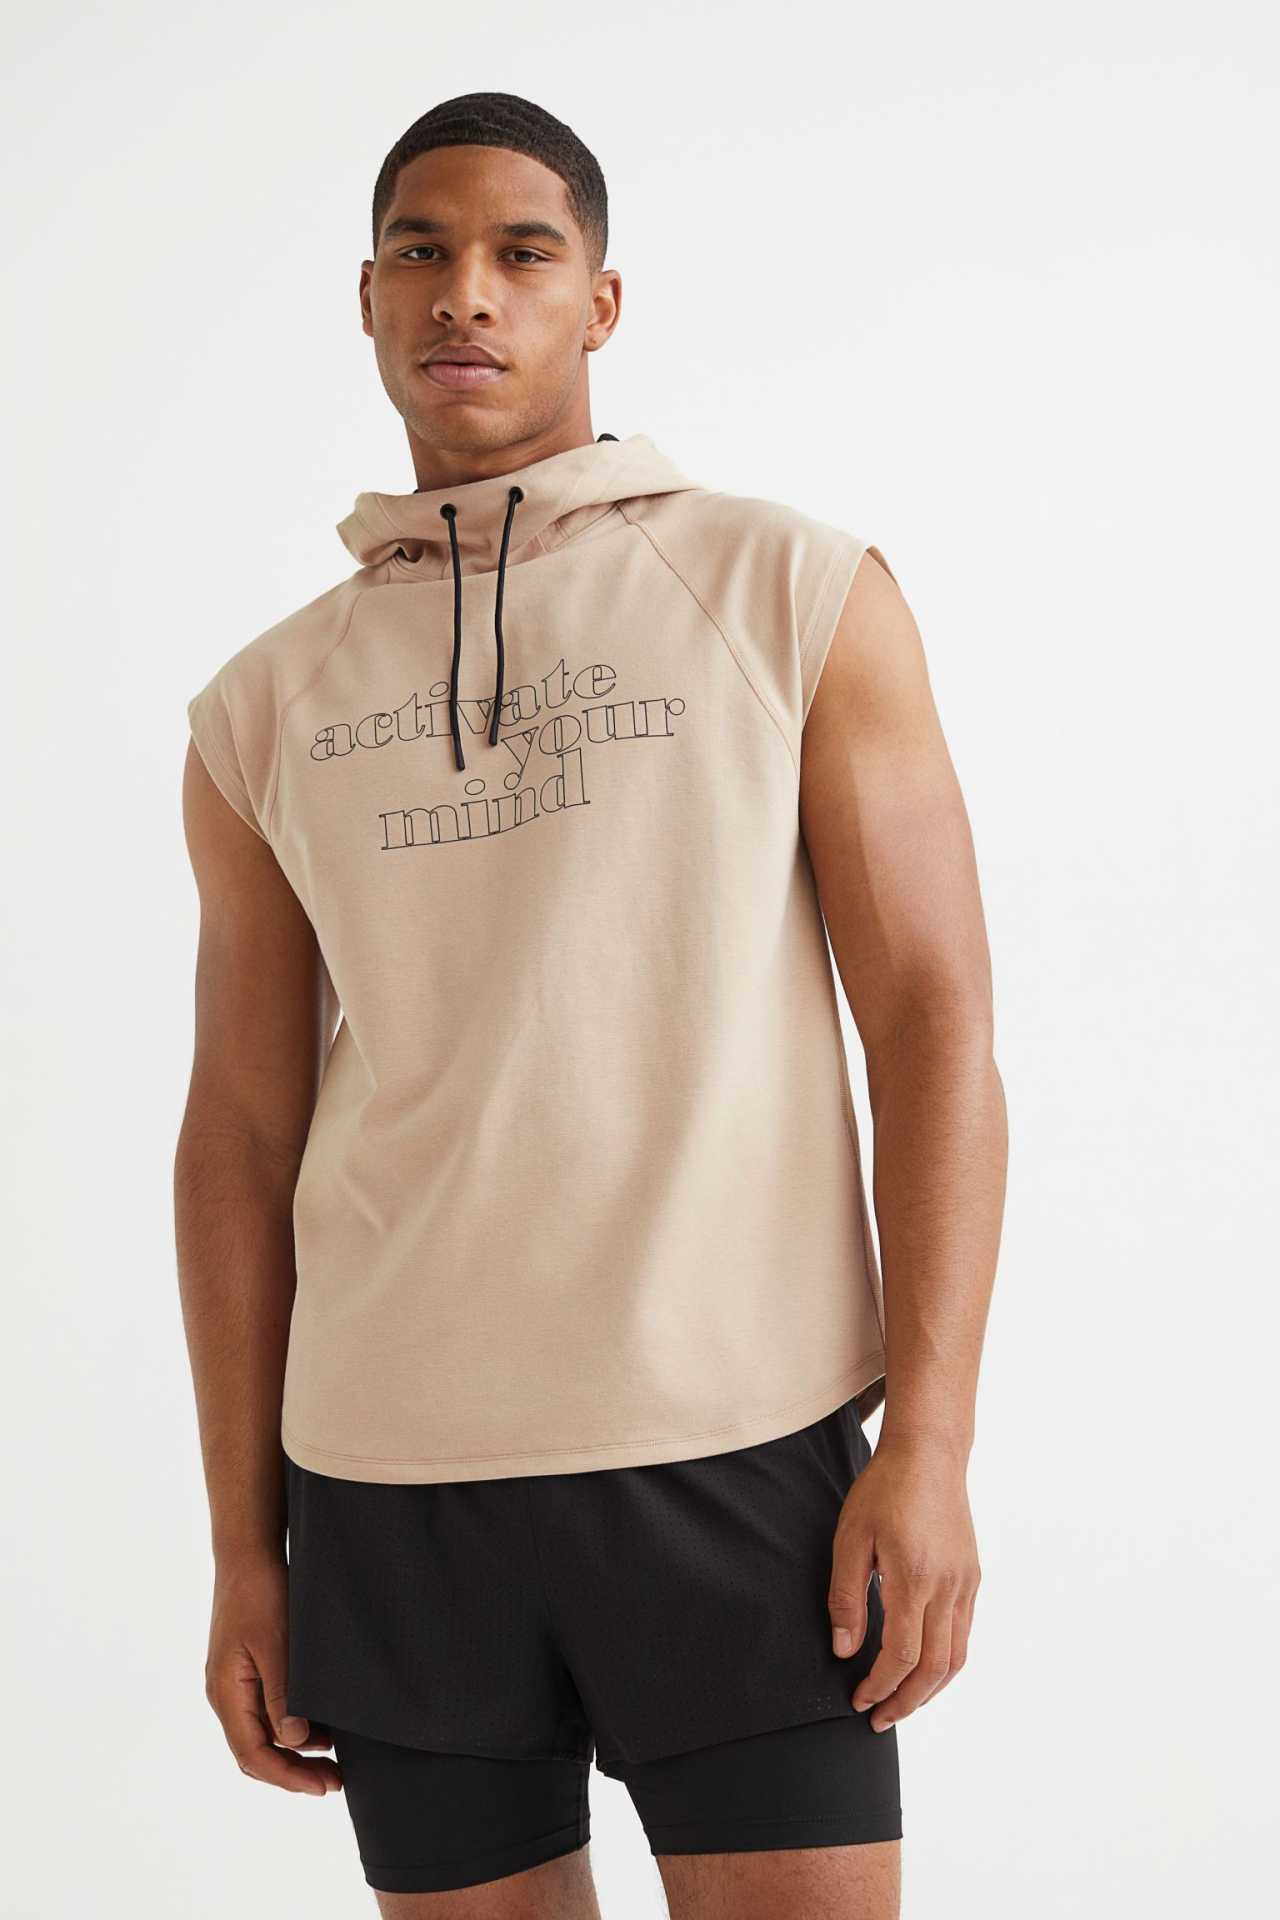 Relaxed Fit Fast-drying sports top